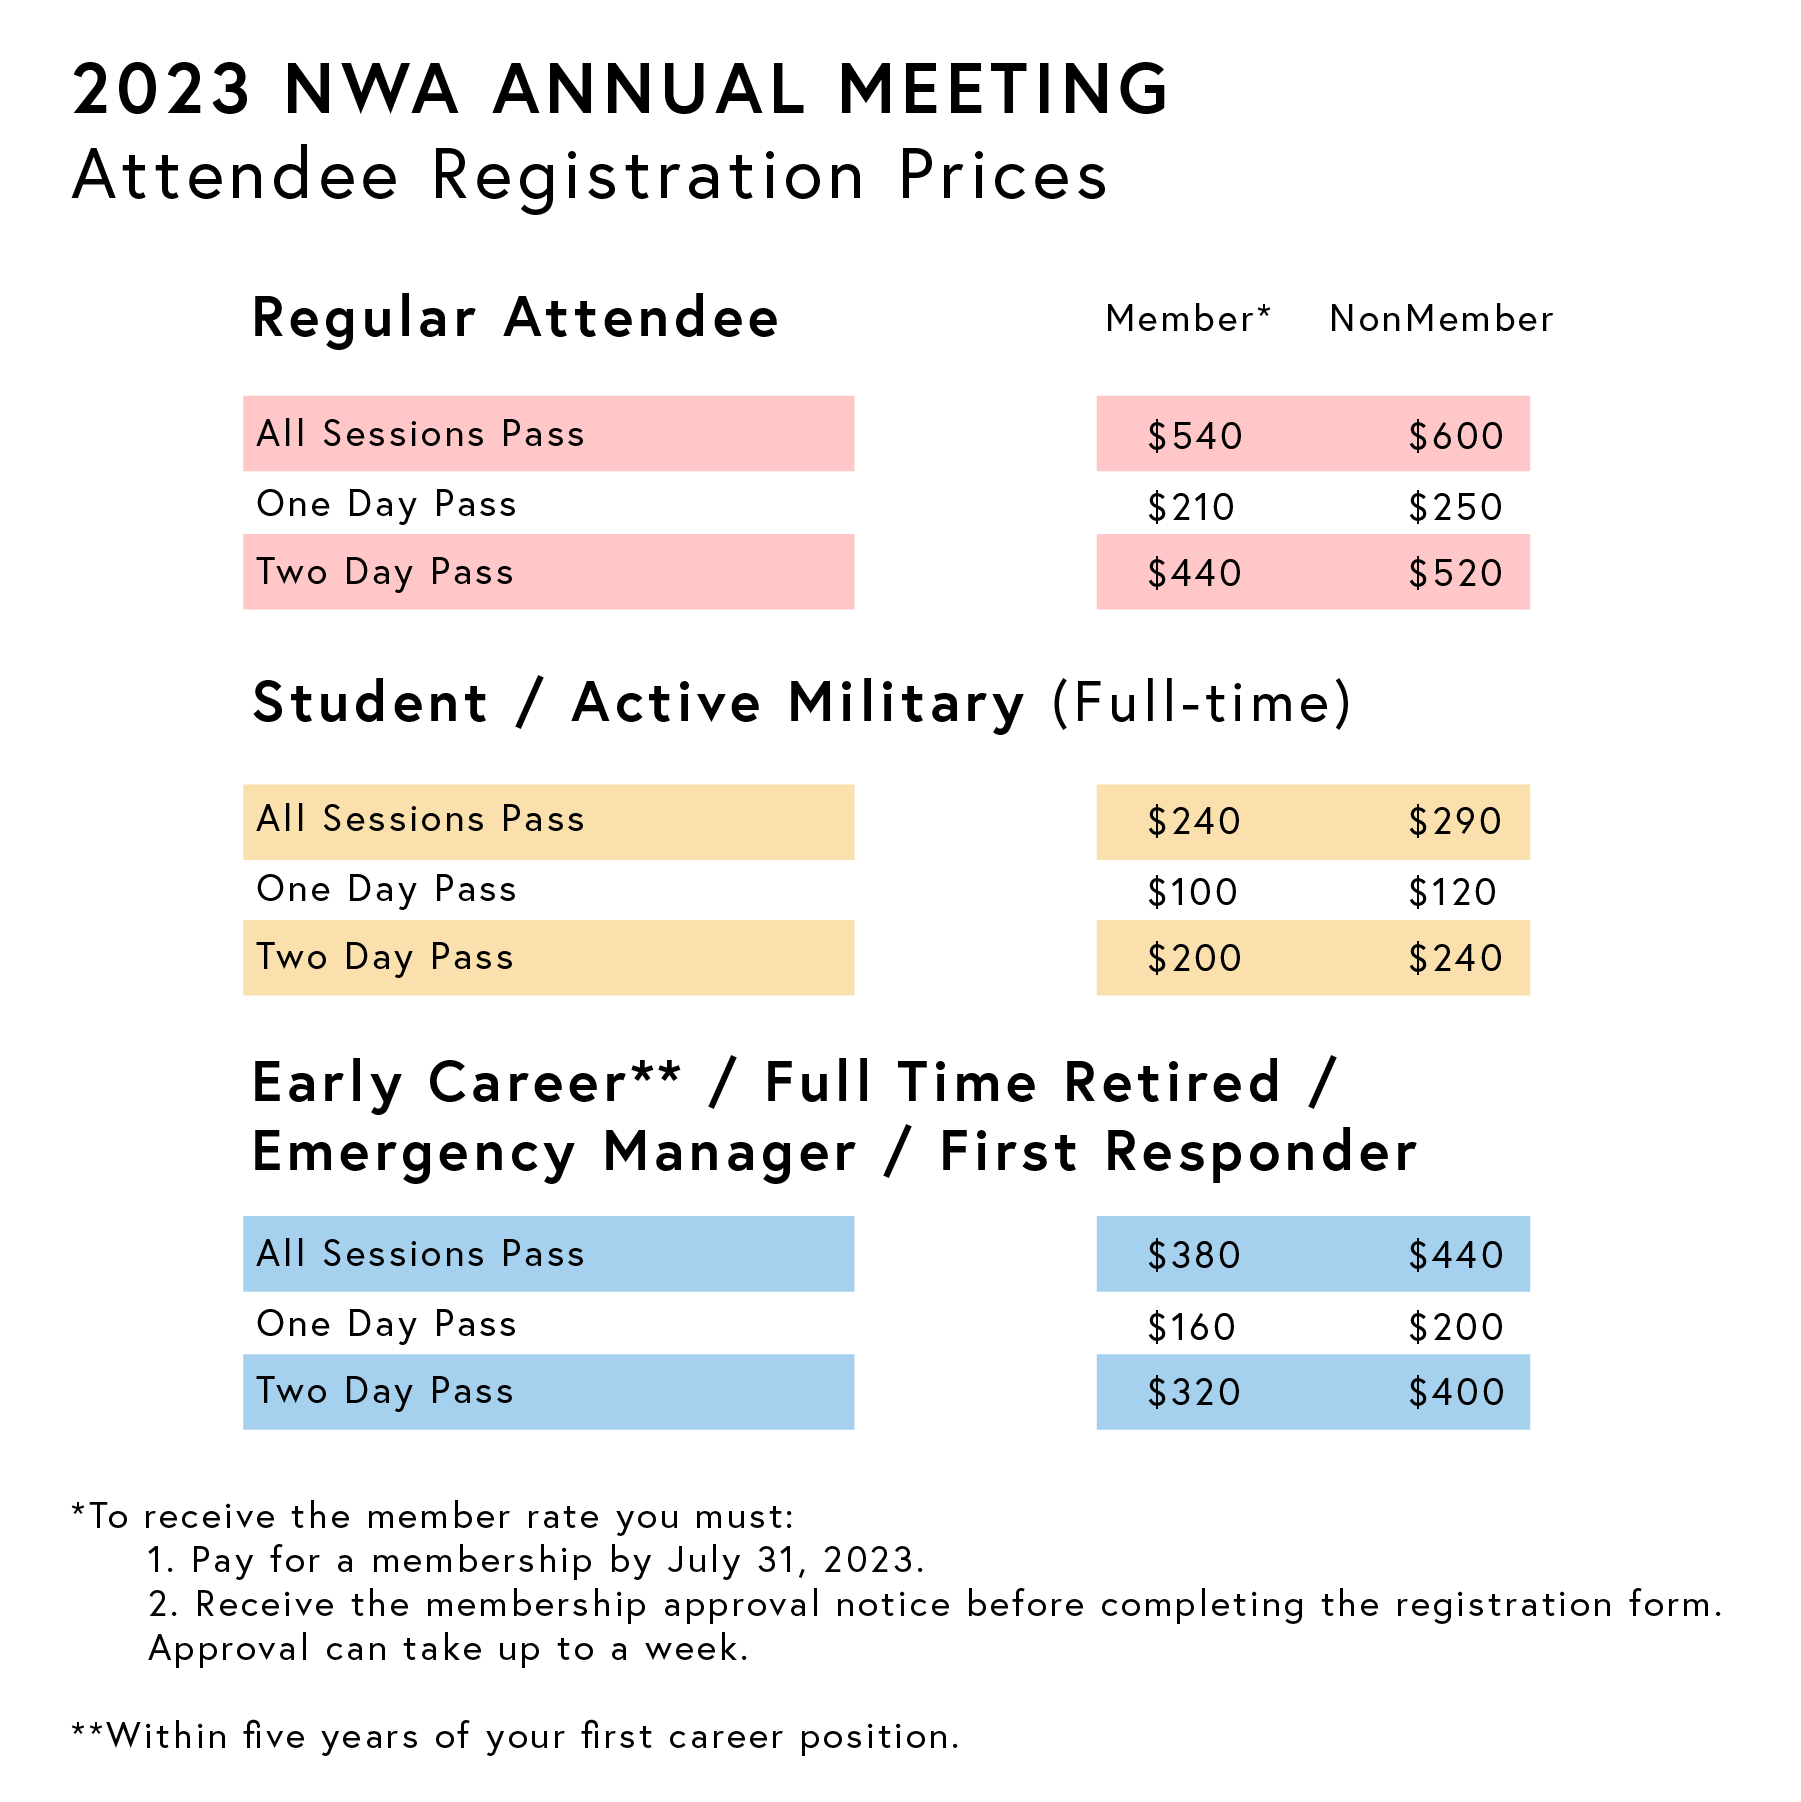 2023 NWA Annual Meeting attendee registration prices for different categories including Regular Attendees, Student/Active Military, and Early Career/Retired/First Responder. Prices range from $100 to $600 for different pass options. Special conditions apply for member rates.